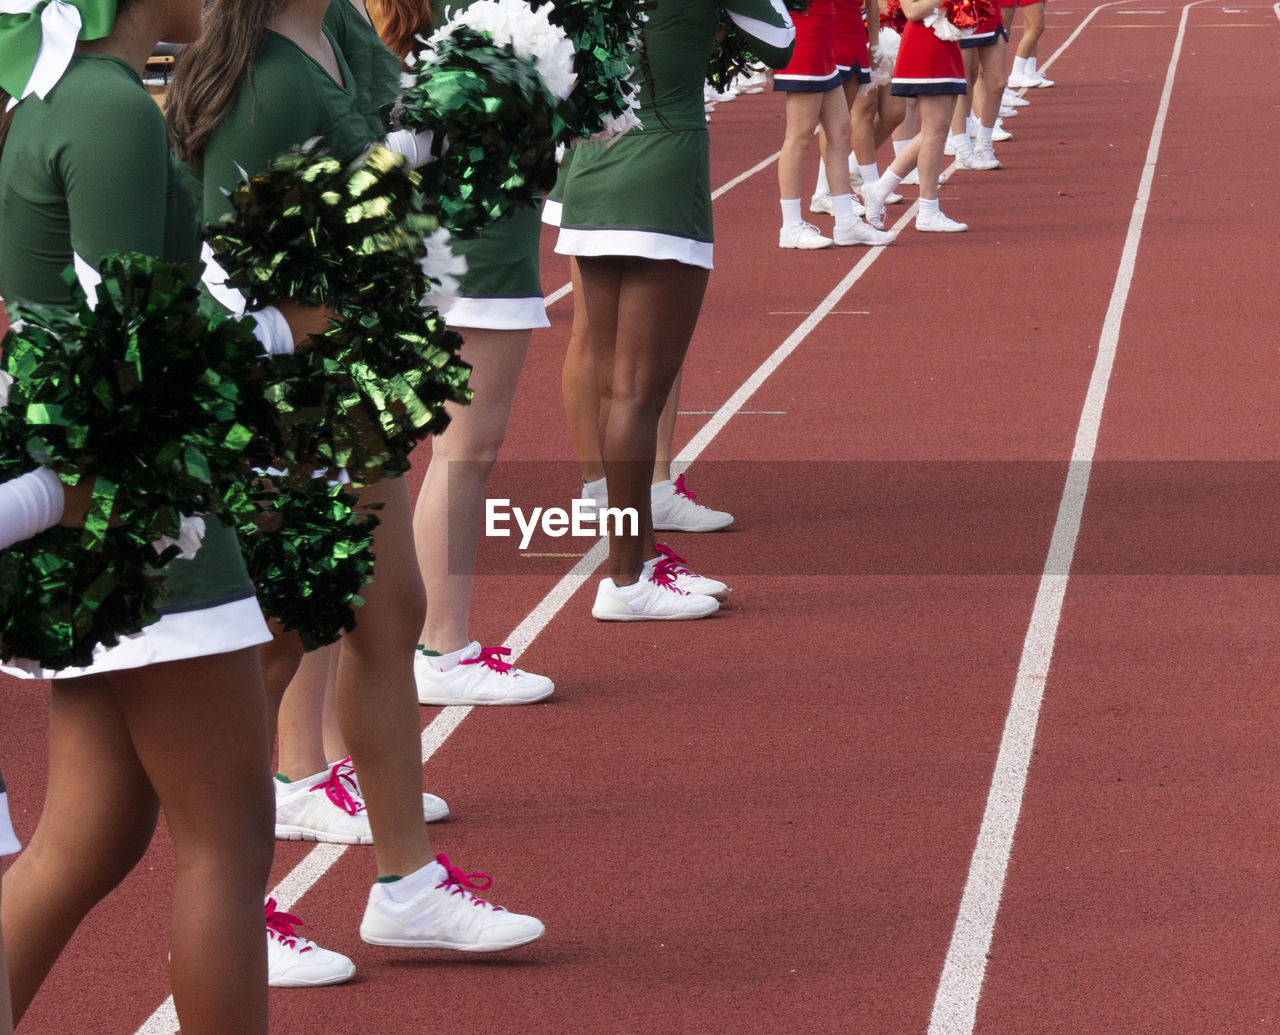 Side view of two cheerleading squads standing on sideline cheering  teams during a football game.